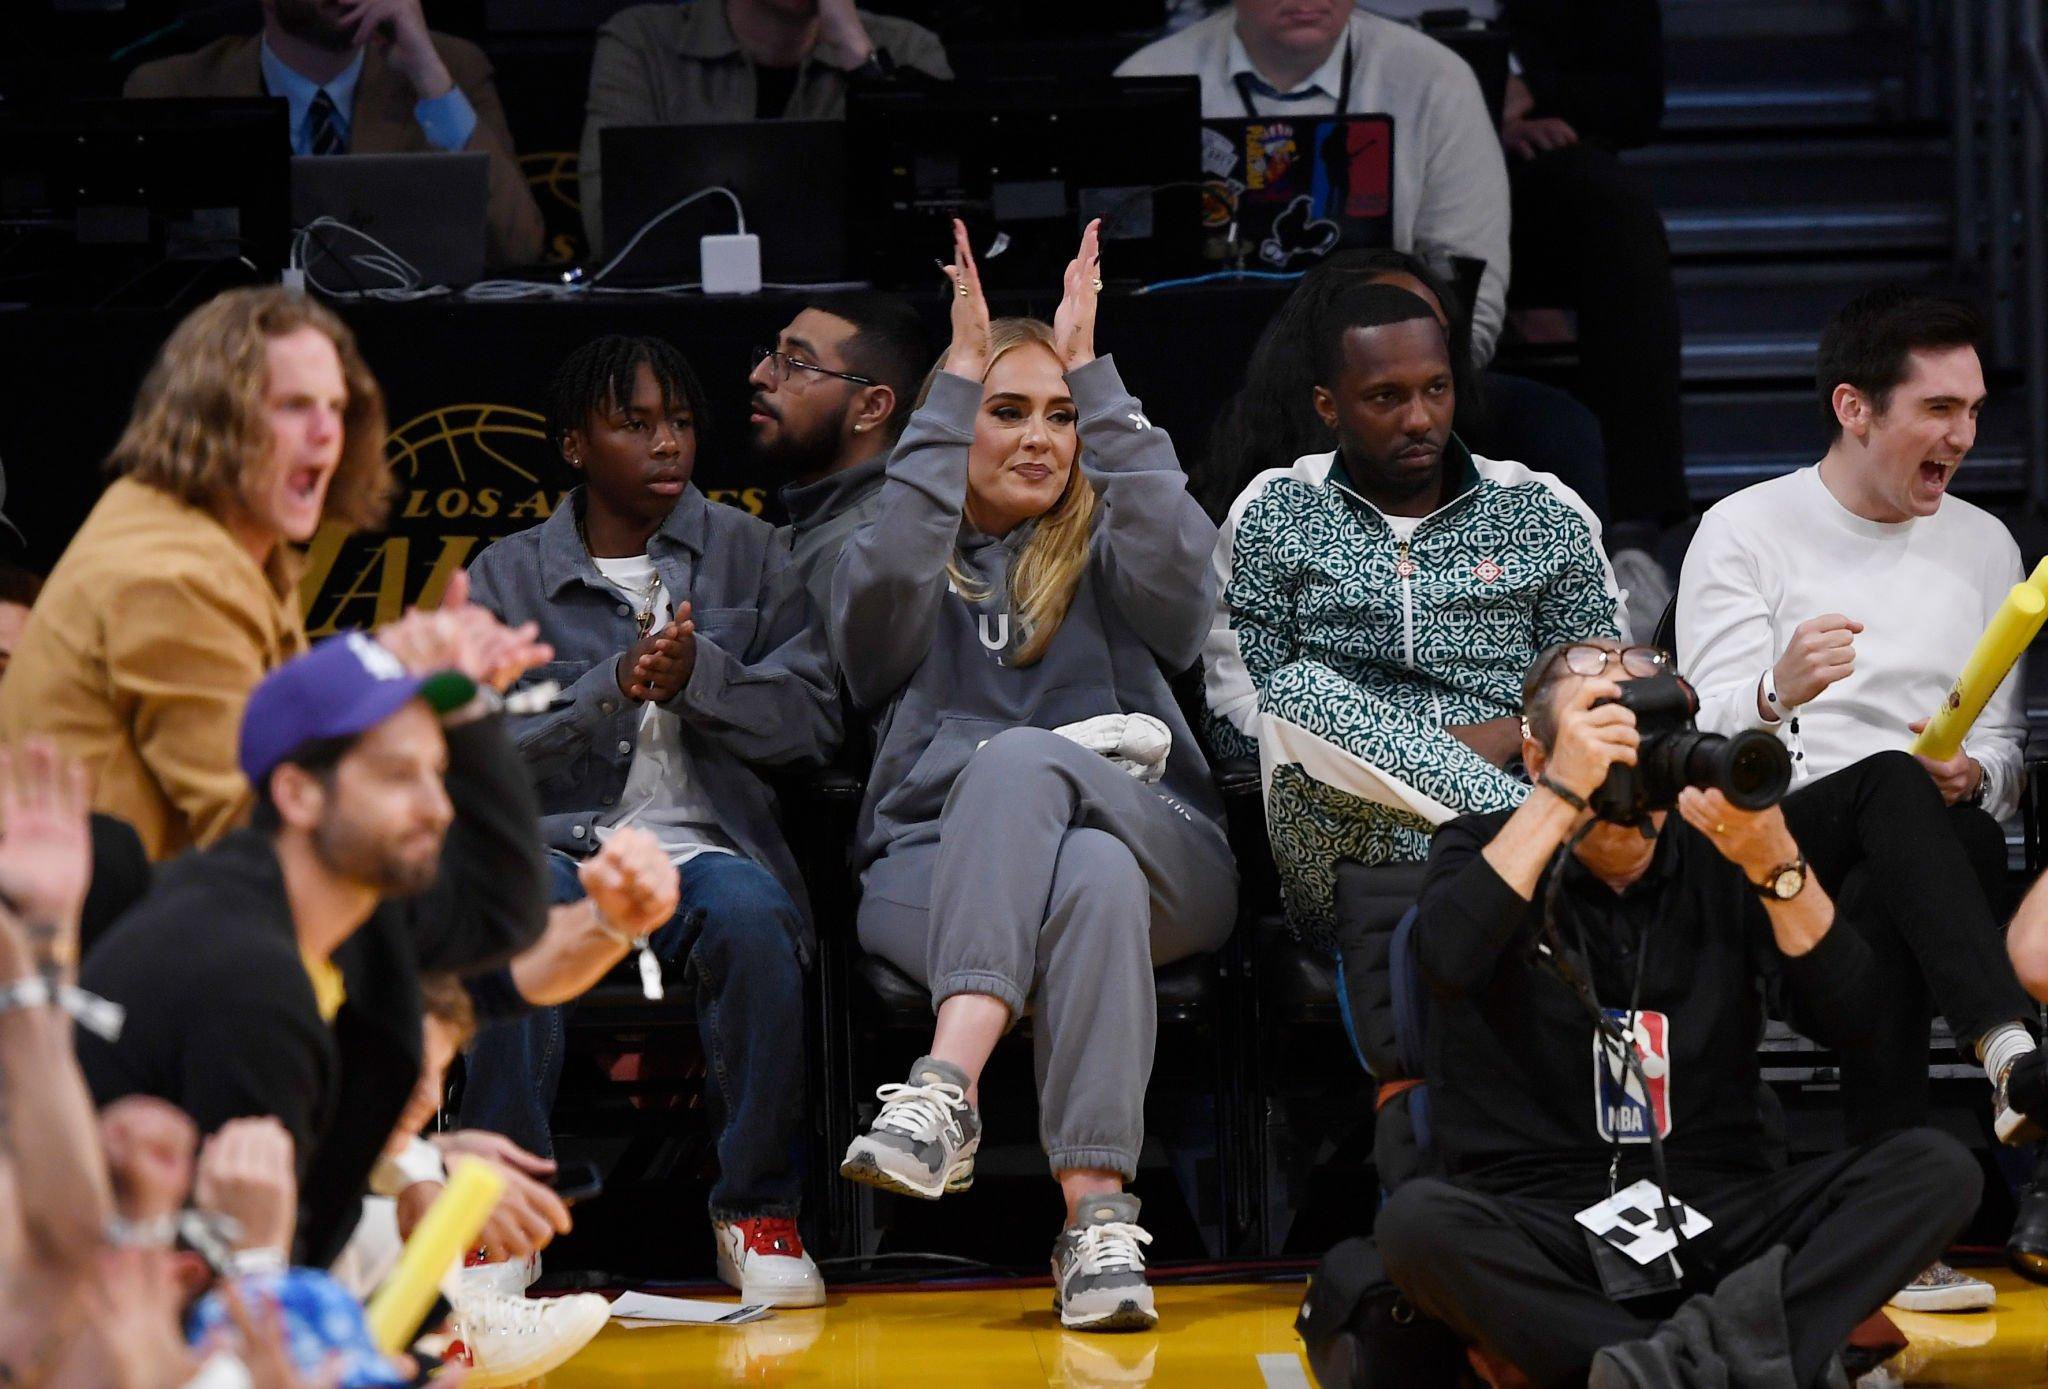 Adele Lakers Game October 19, 2021 – Star Style